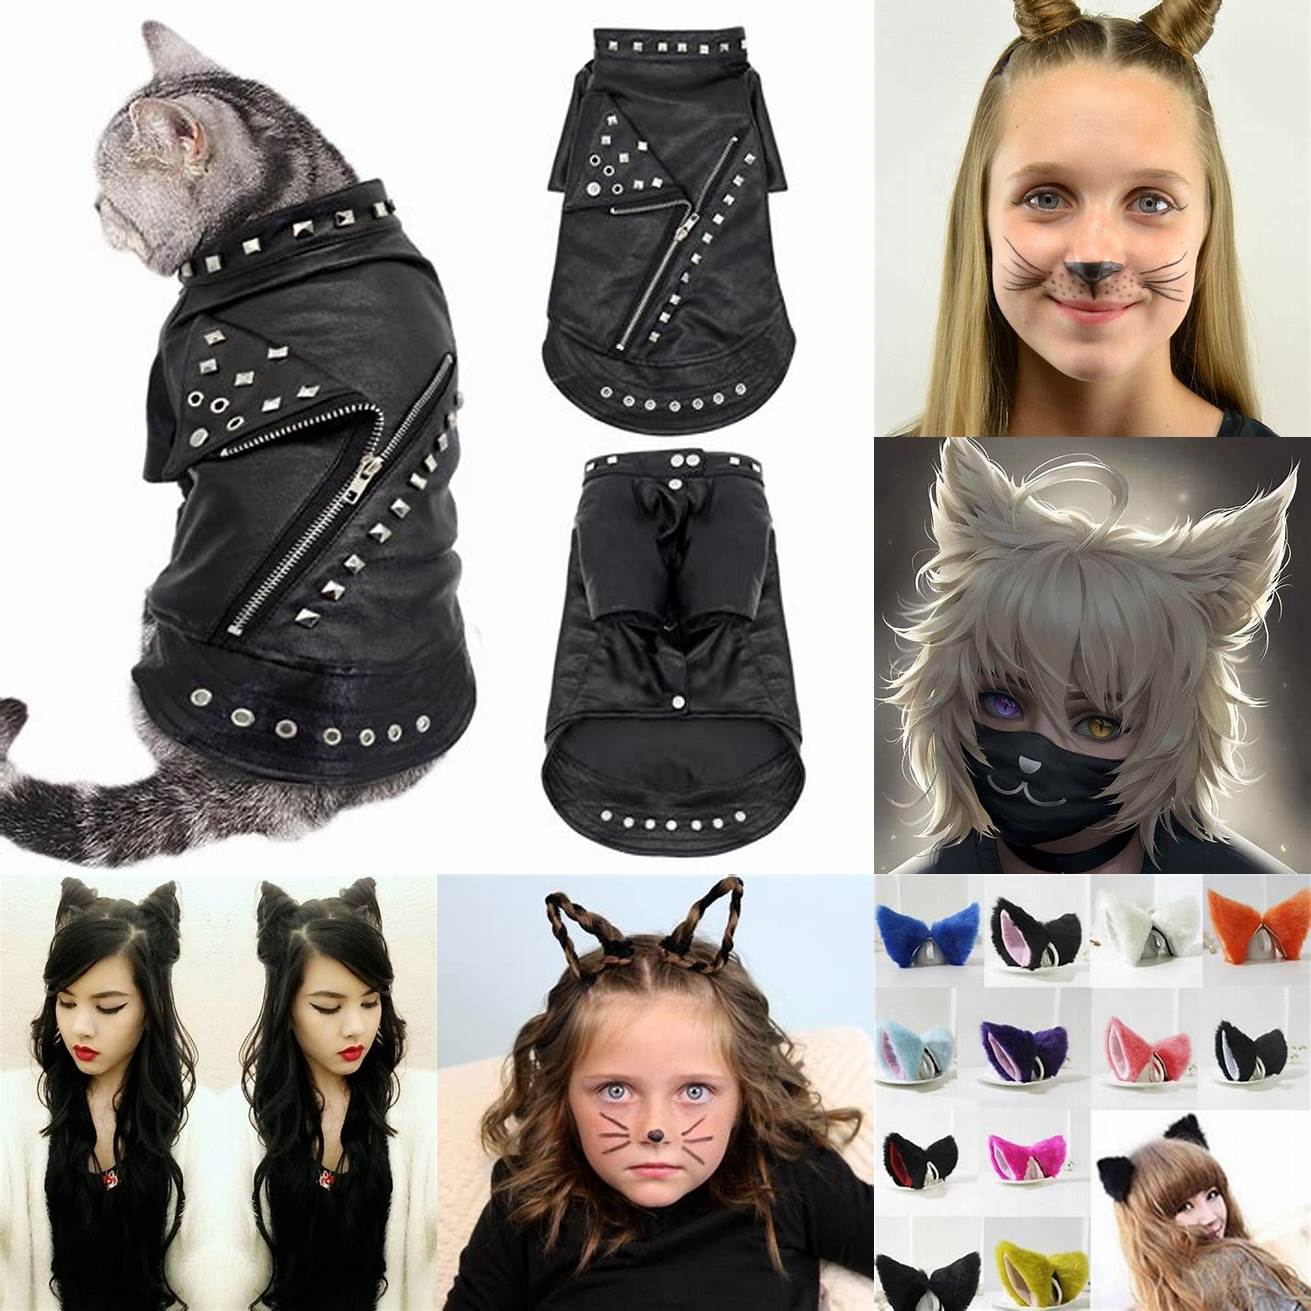 Cat ears with hair paired with a leather jacket